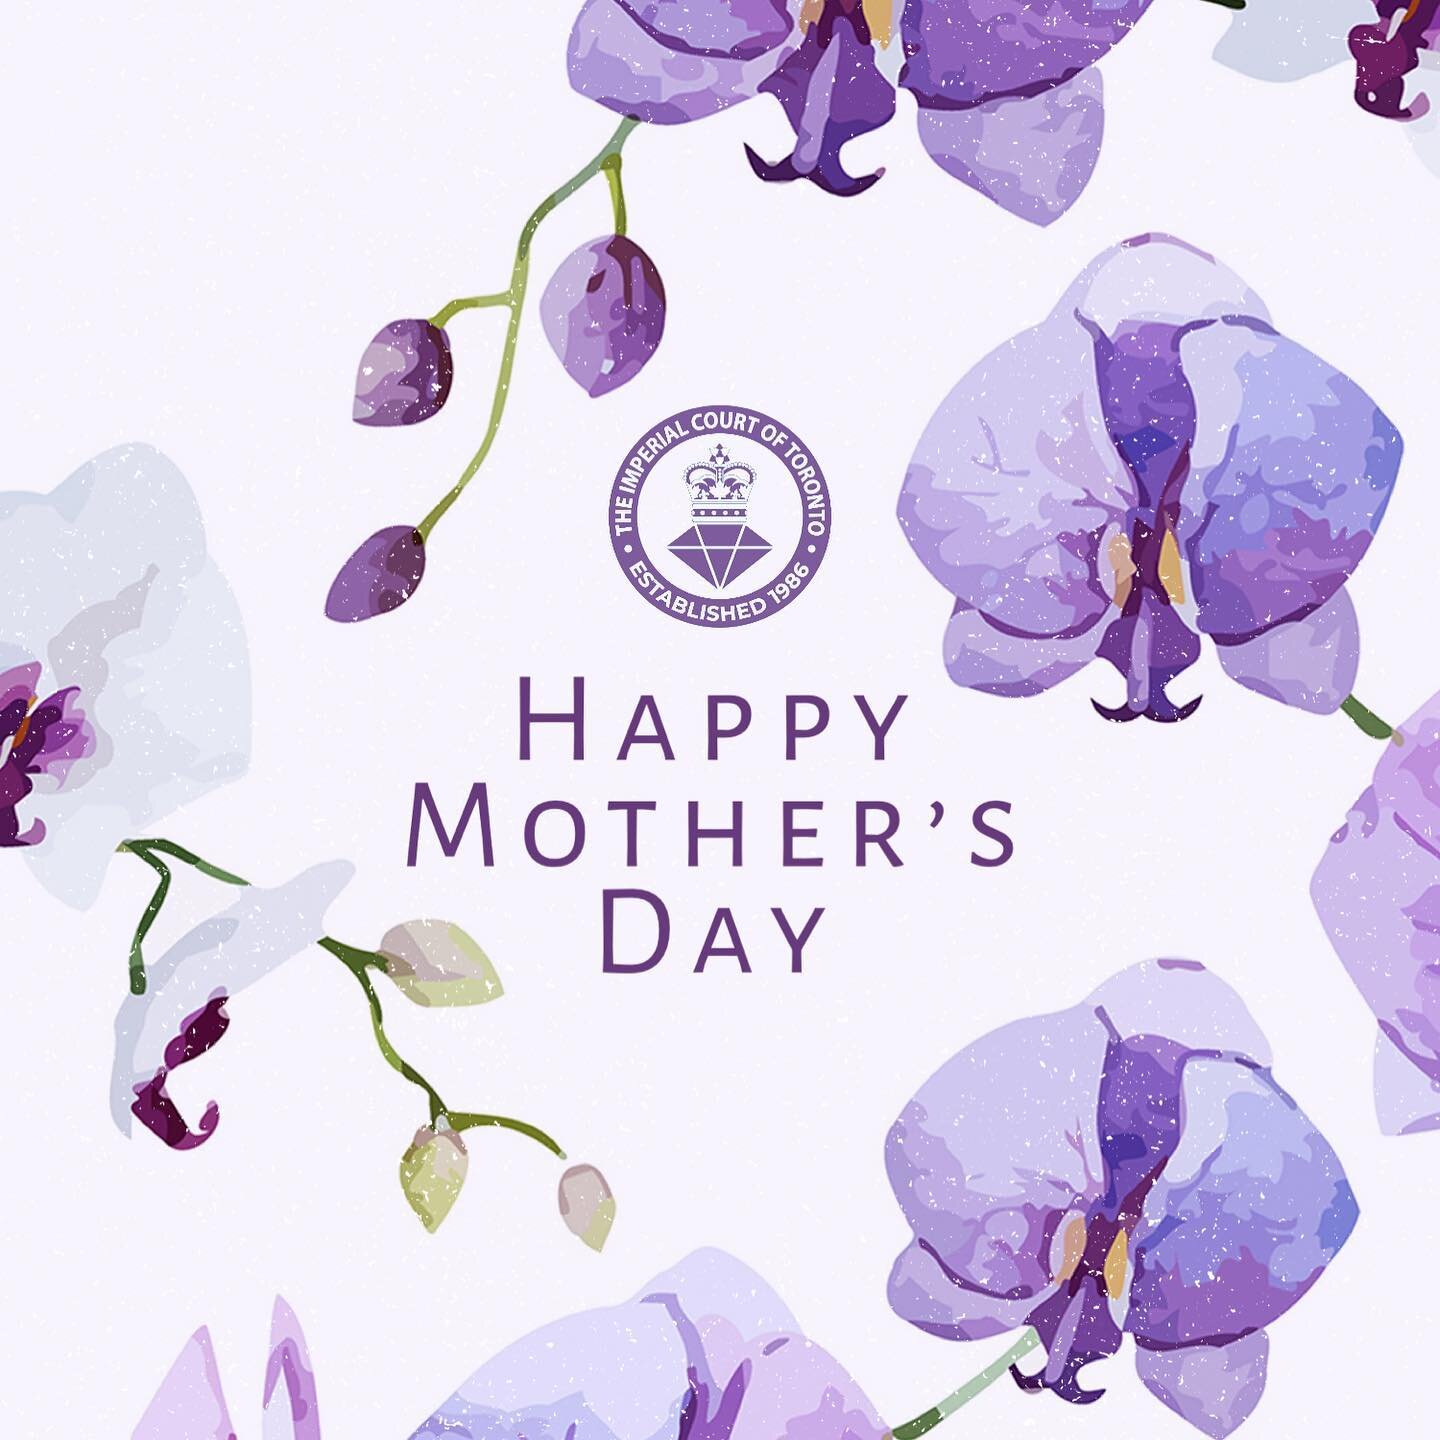 On behalf of The Imperial Court of Toronto, we wish all of the Mothers, future Mothers, past Mothers and any other Mother figures a Happy Safe and loving Mother&rsquo;s Day. This one&rsquo;s for you!

#mothersday #mom #toronto #canada #supporteachoth